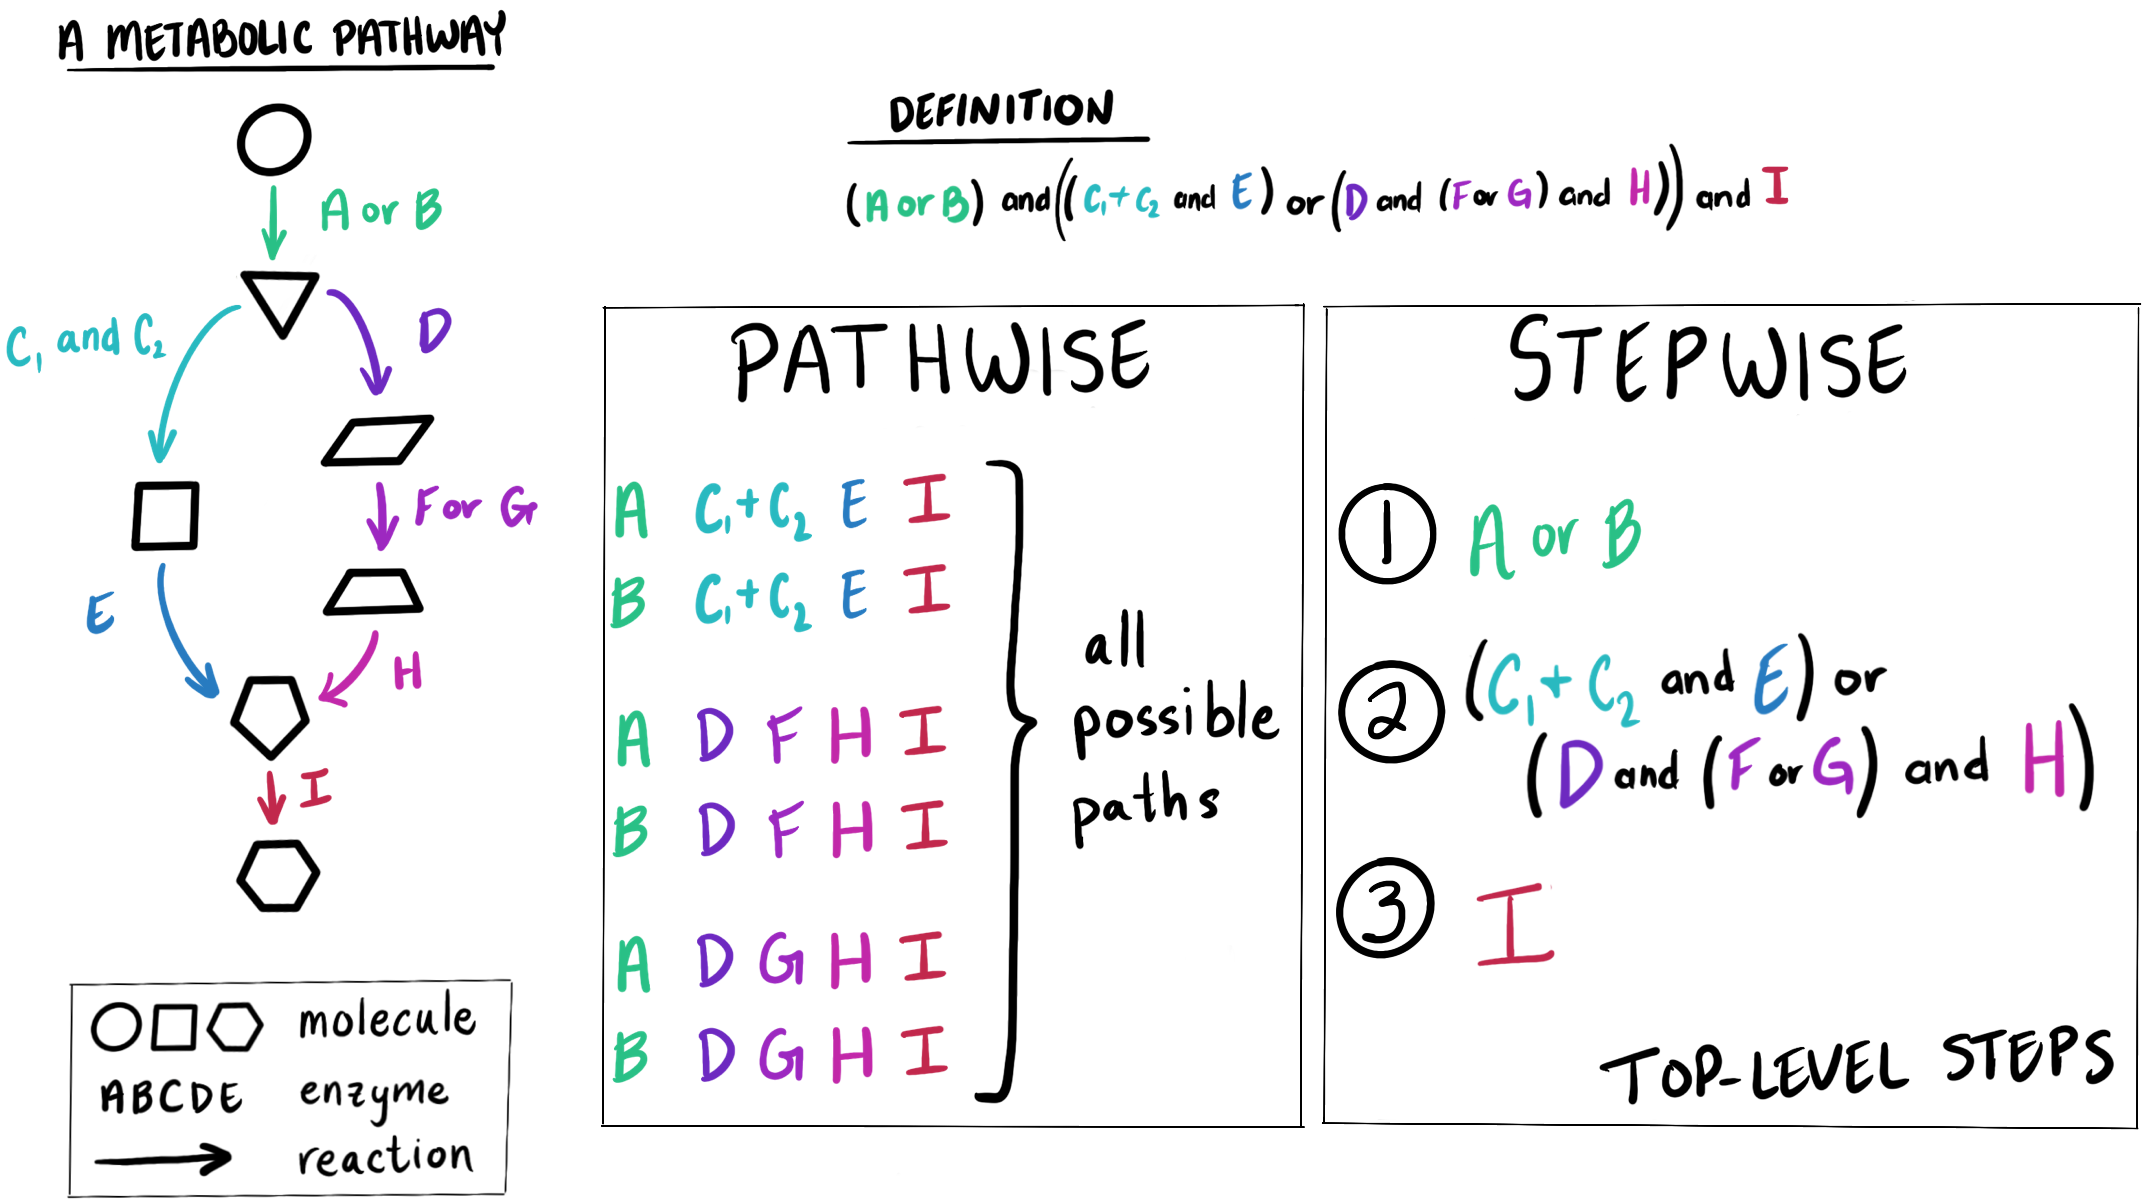 A comparison of the pathwise and stepwise strategies